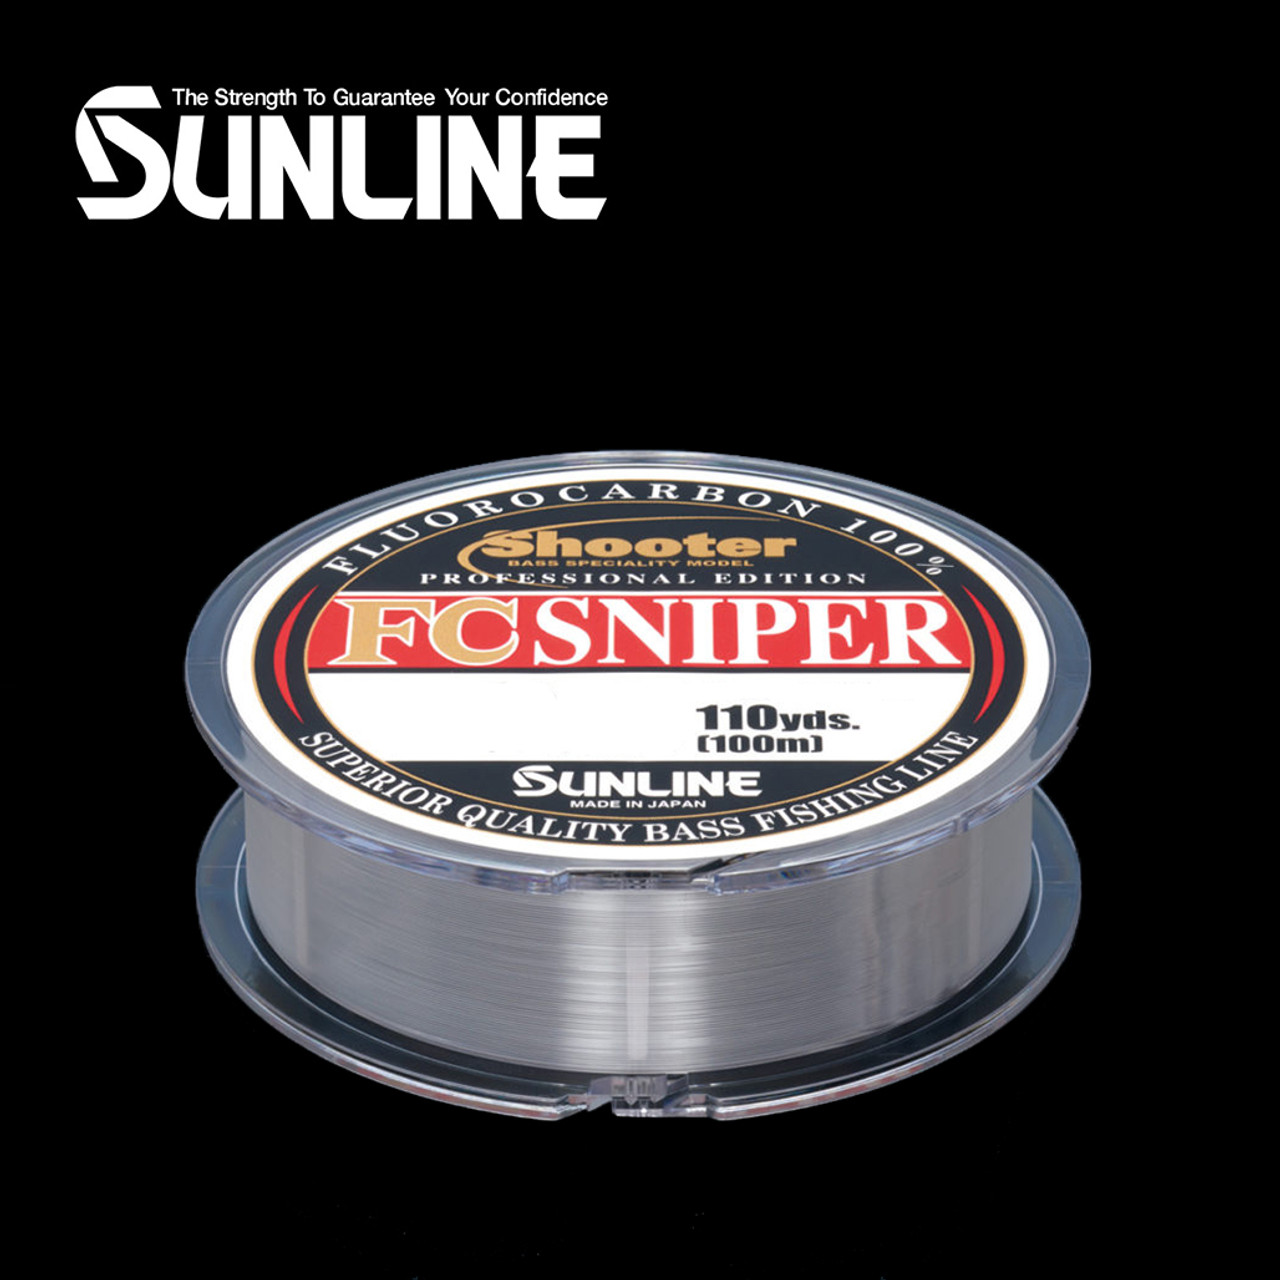 SUNLINE Shooter FC SNIPER Fluoro Carbon Line 10lbs. 110yds. NEW